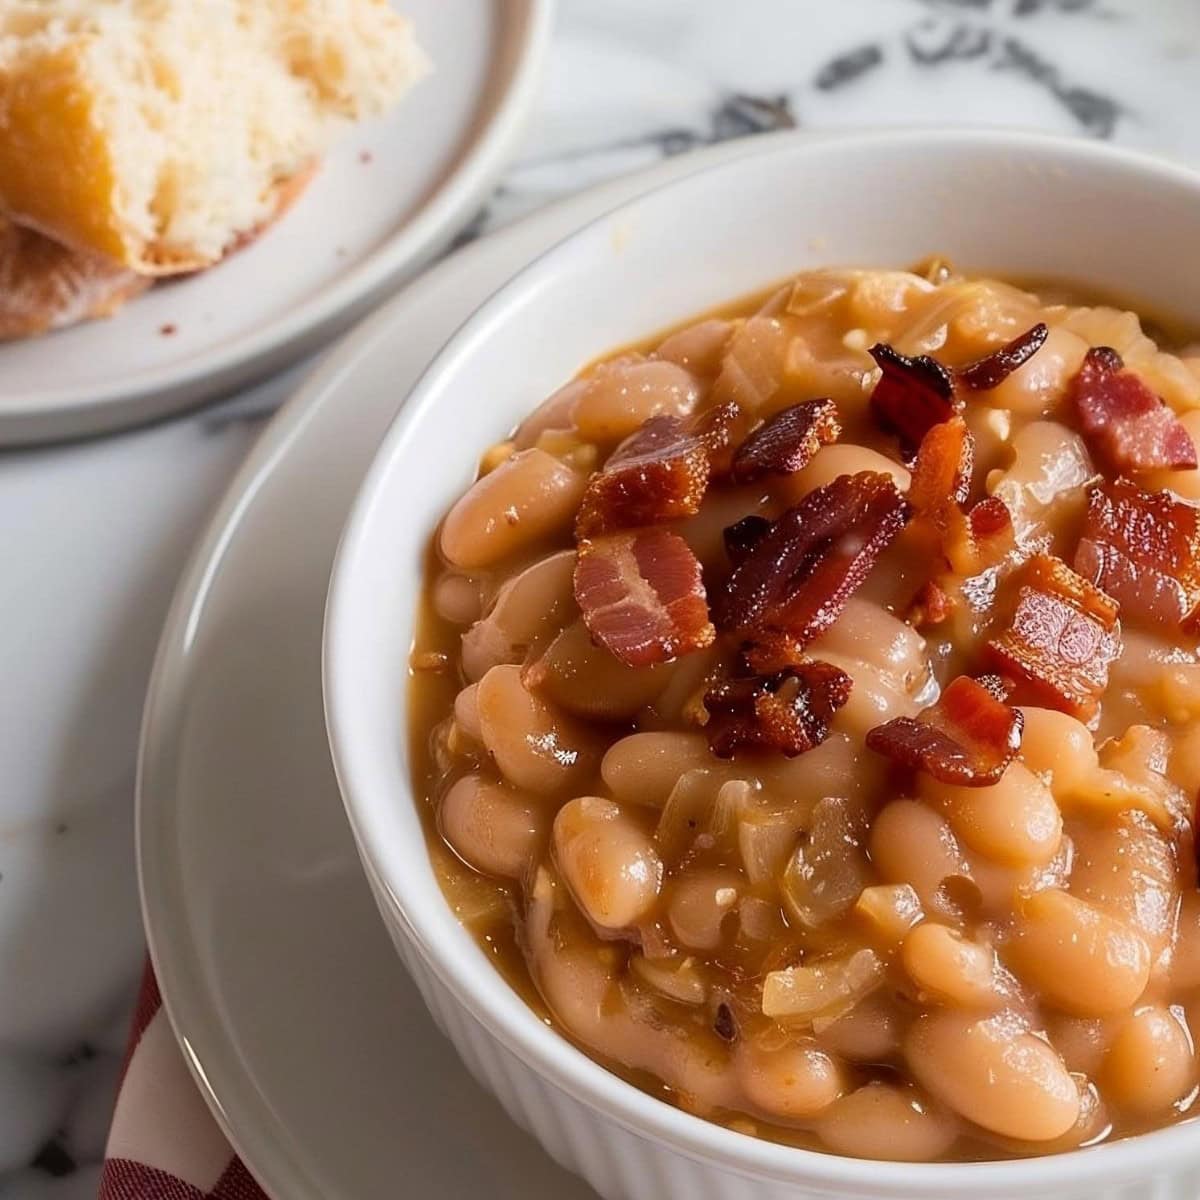 Bowl of Grandma Brown's Baked Beans in a Bowl with Crusty Bread on a Plate to the Side